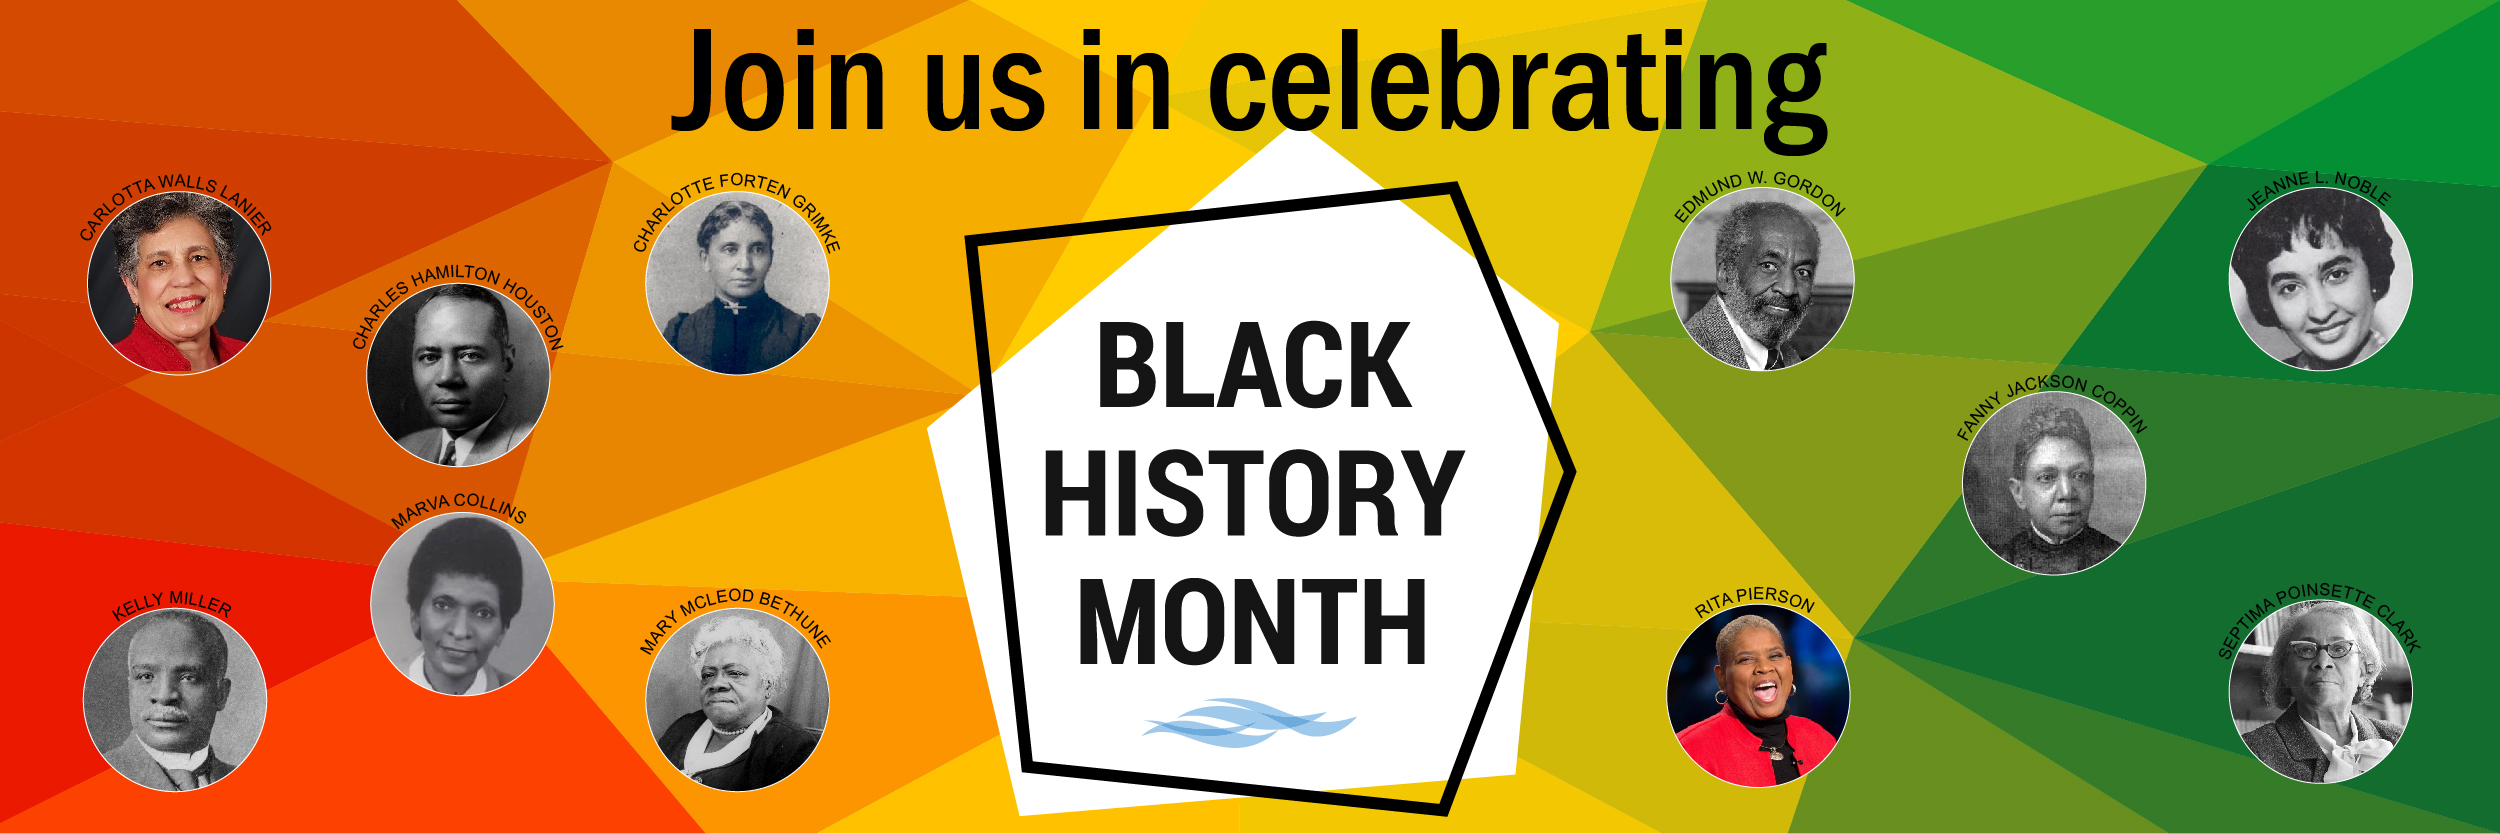 Background of red, yellow and green in geometric patterns with the words join us in celebrating Black History Month accompanied by twelve images of prominent Black educators